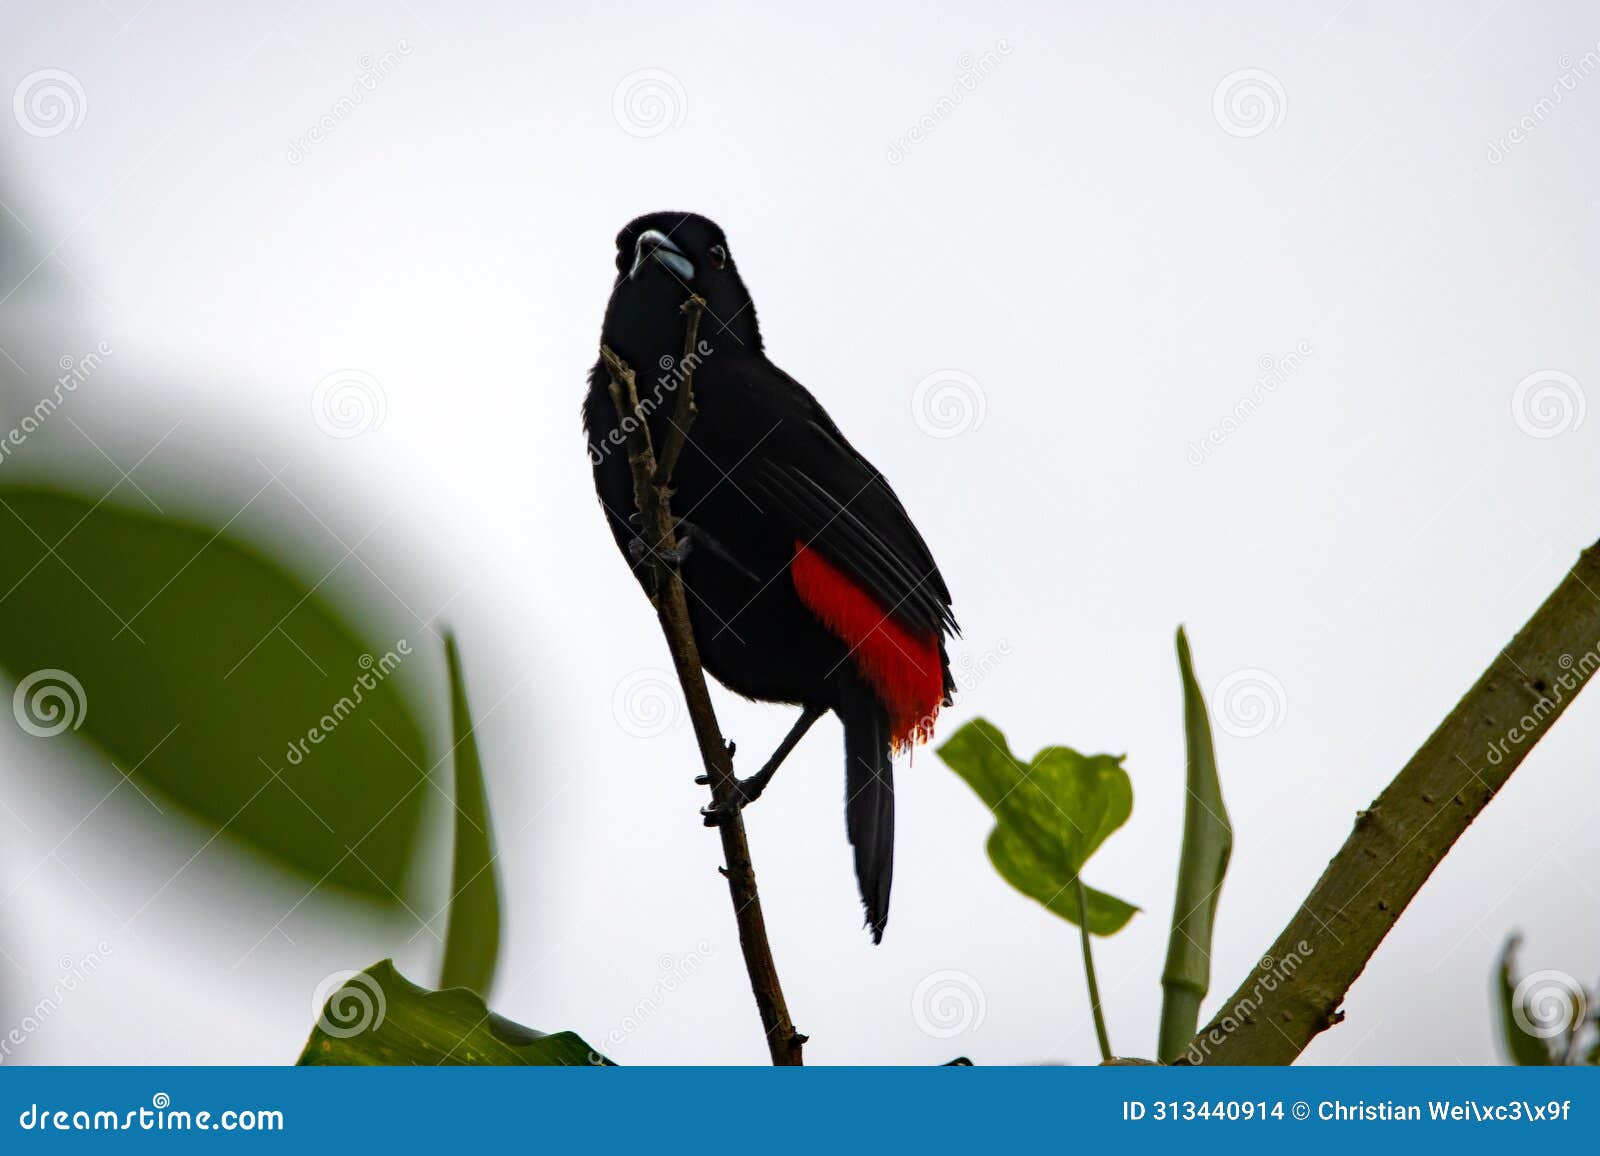 scarlet rumped tanager, ramphocelus passerinii, on a branch